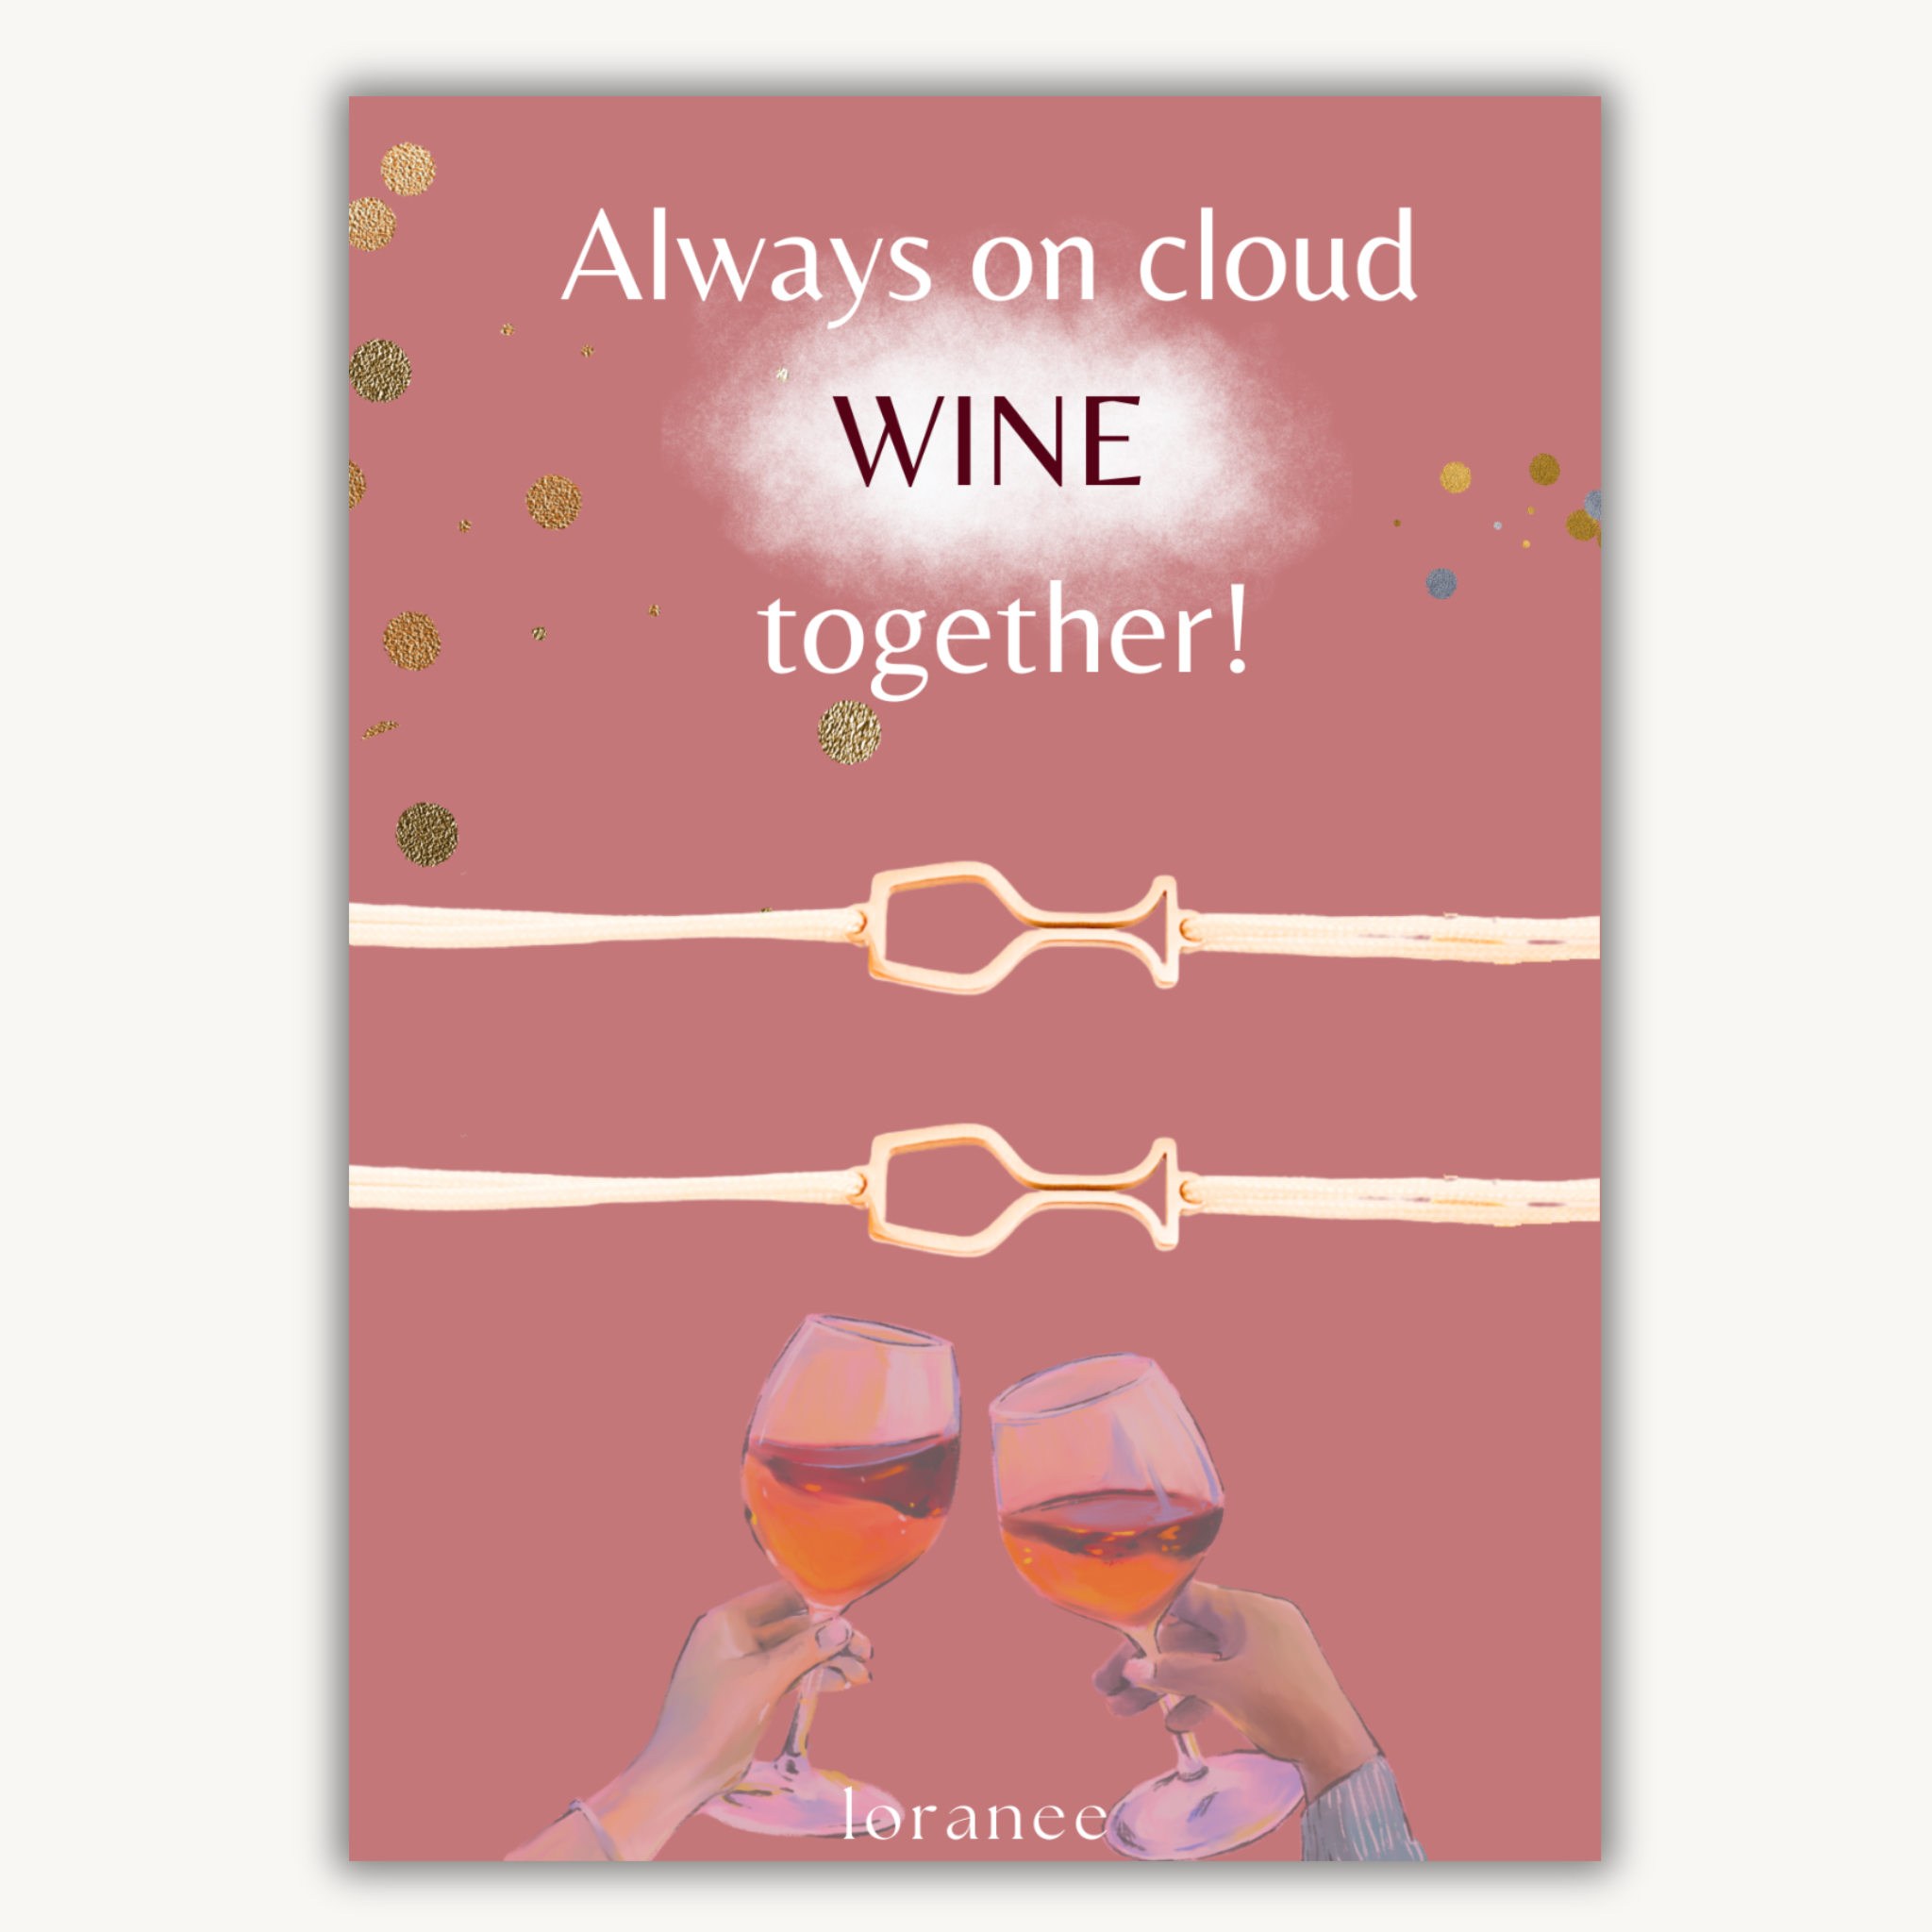 ALWAYS ON CLOUD WINE TOGETHER